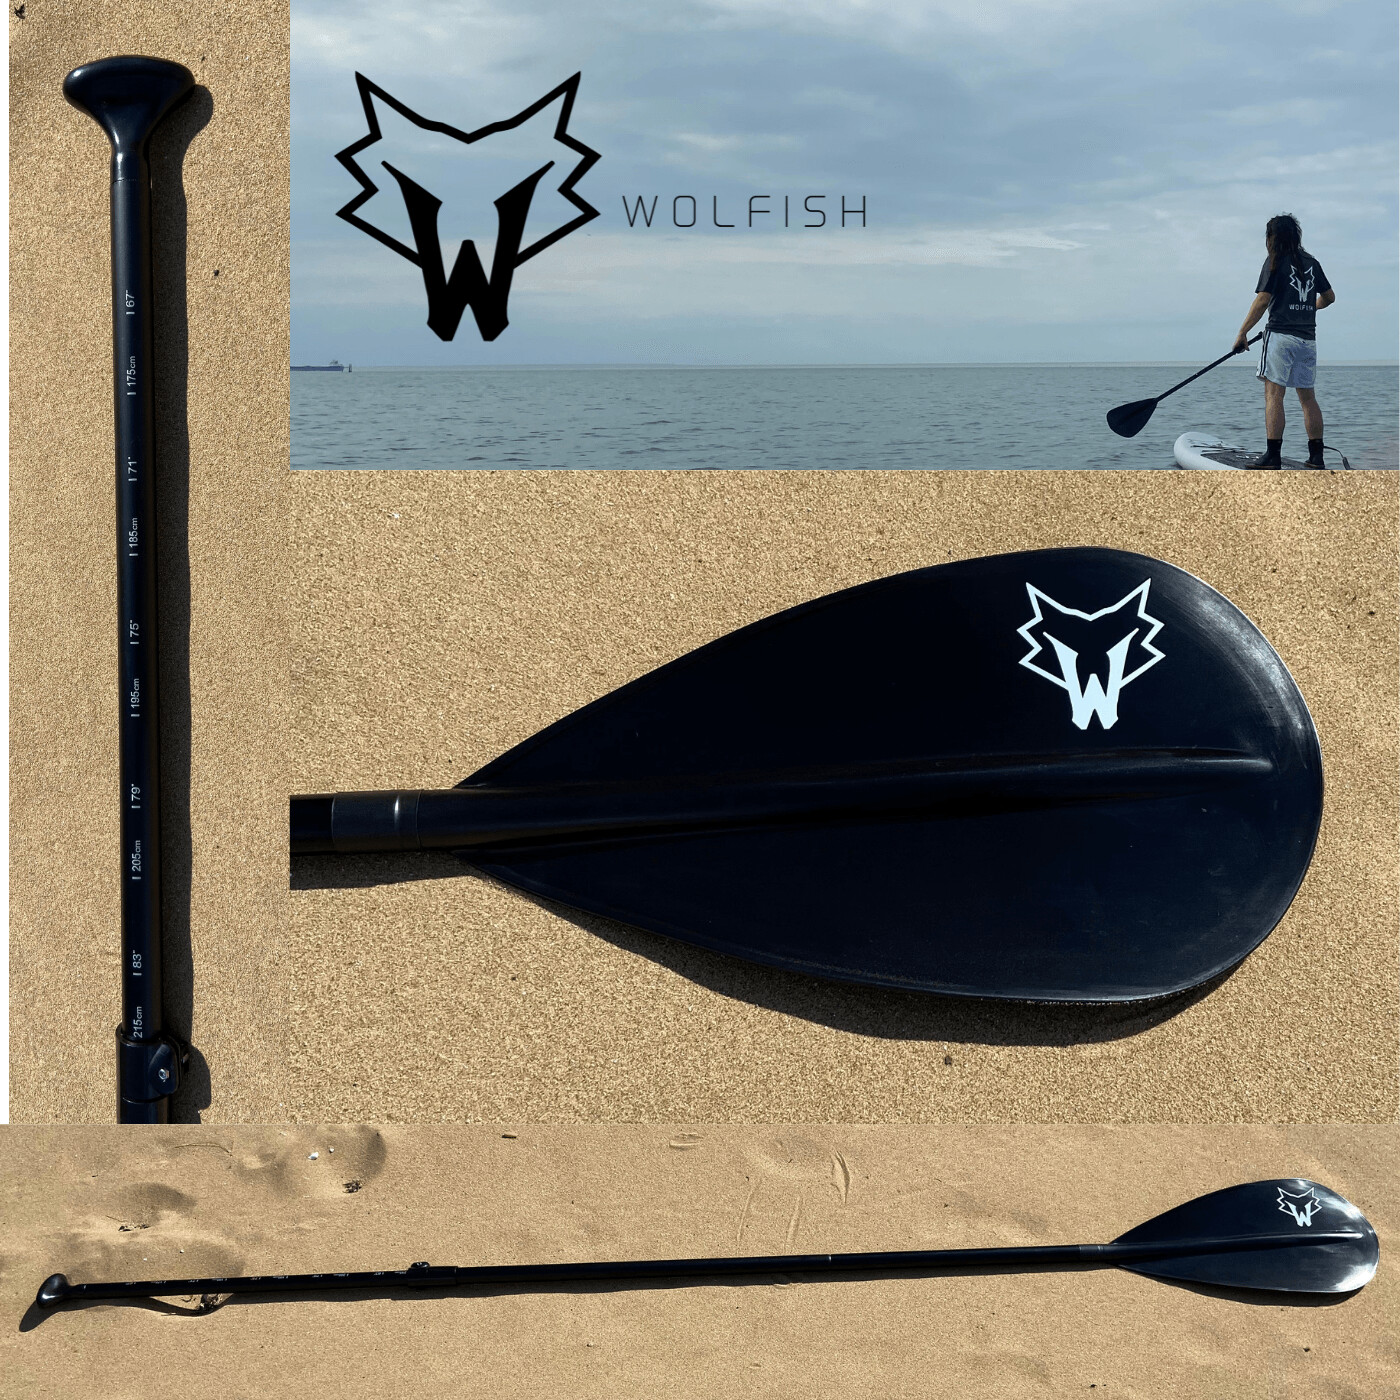 WOLFISH SPORTS 16" x 8.5" Paddle Board SUP 2 Part Paddle adjusts to 215cms. 